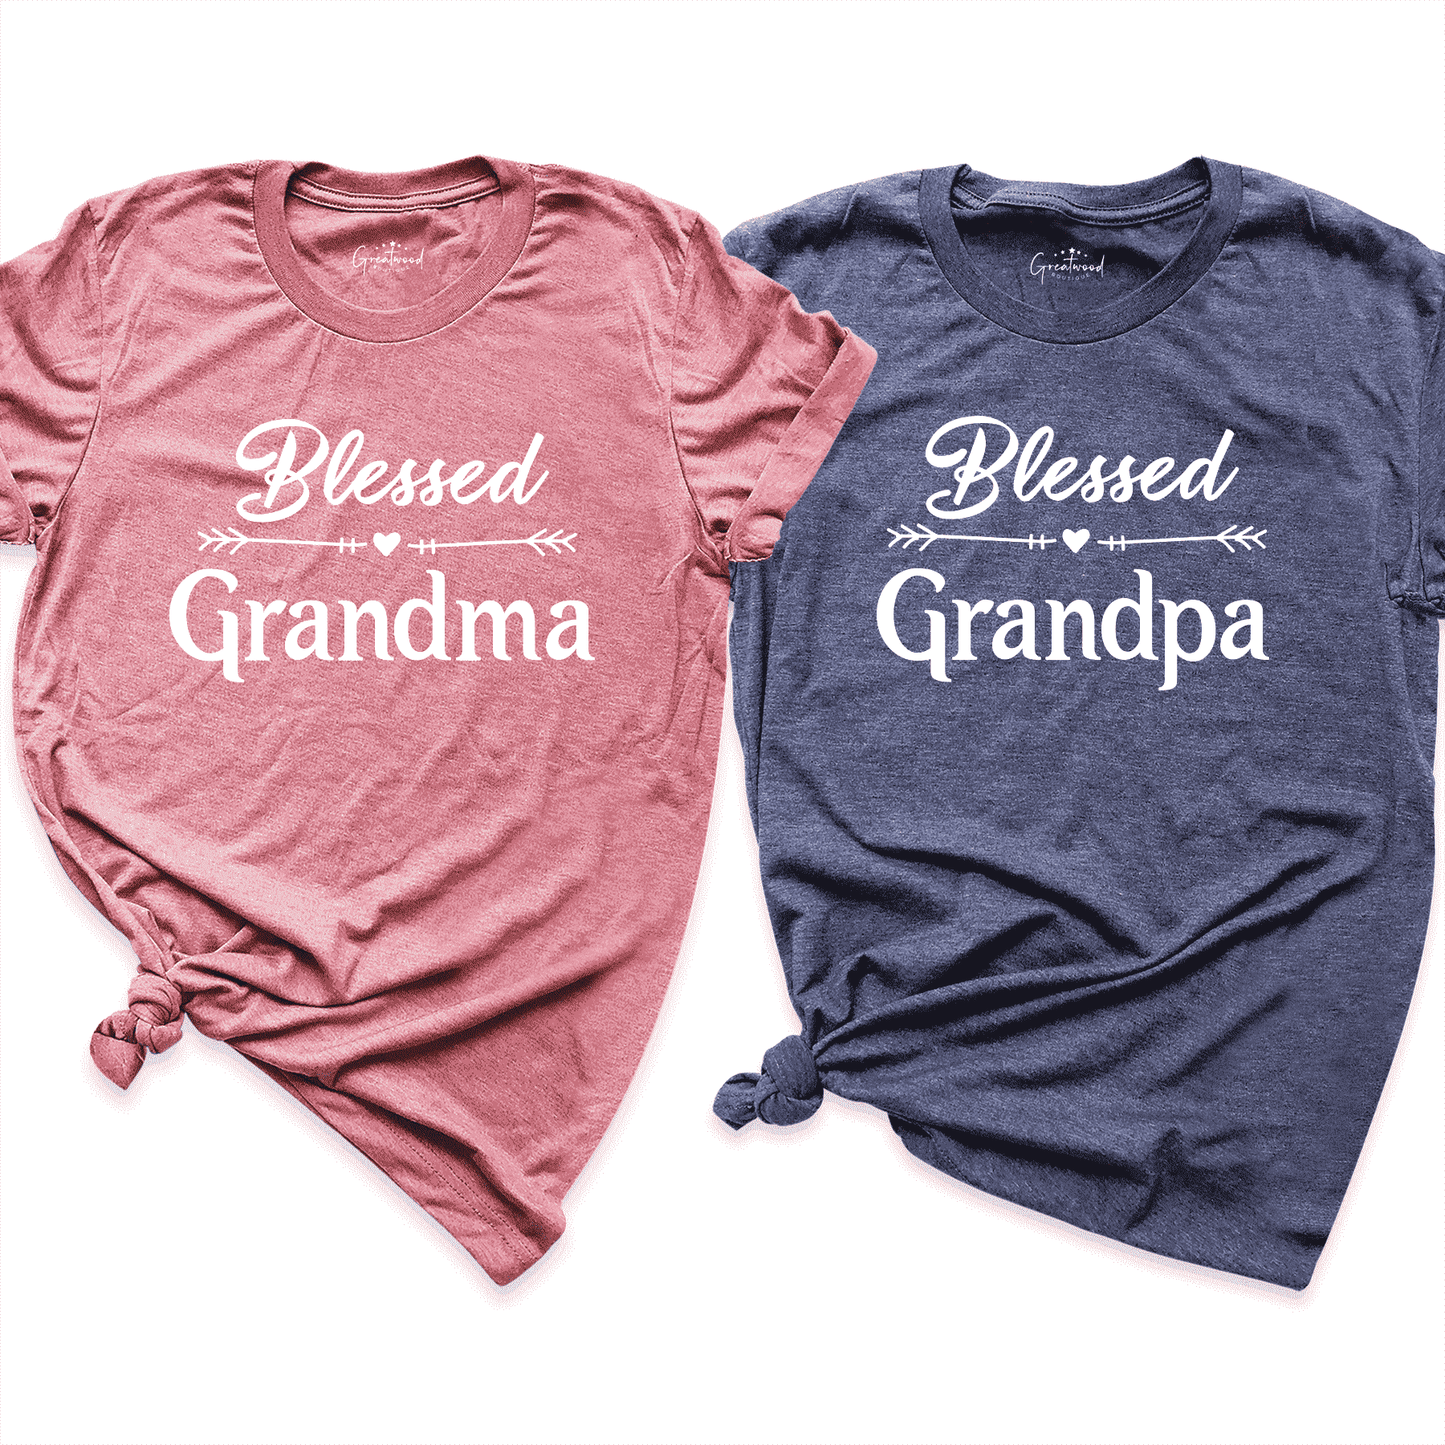 Blessed Grandma & Grandpa Shirt Mauve, Navy - Greatwood Boutique